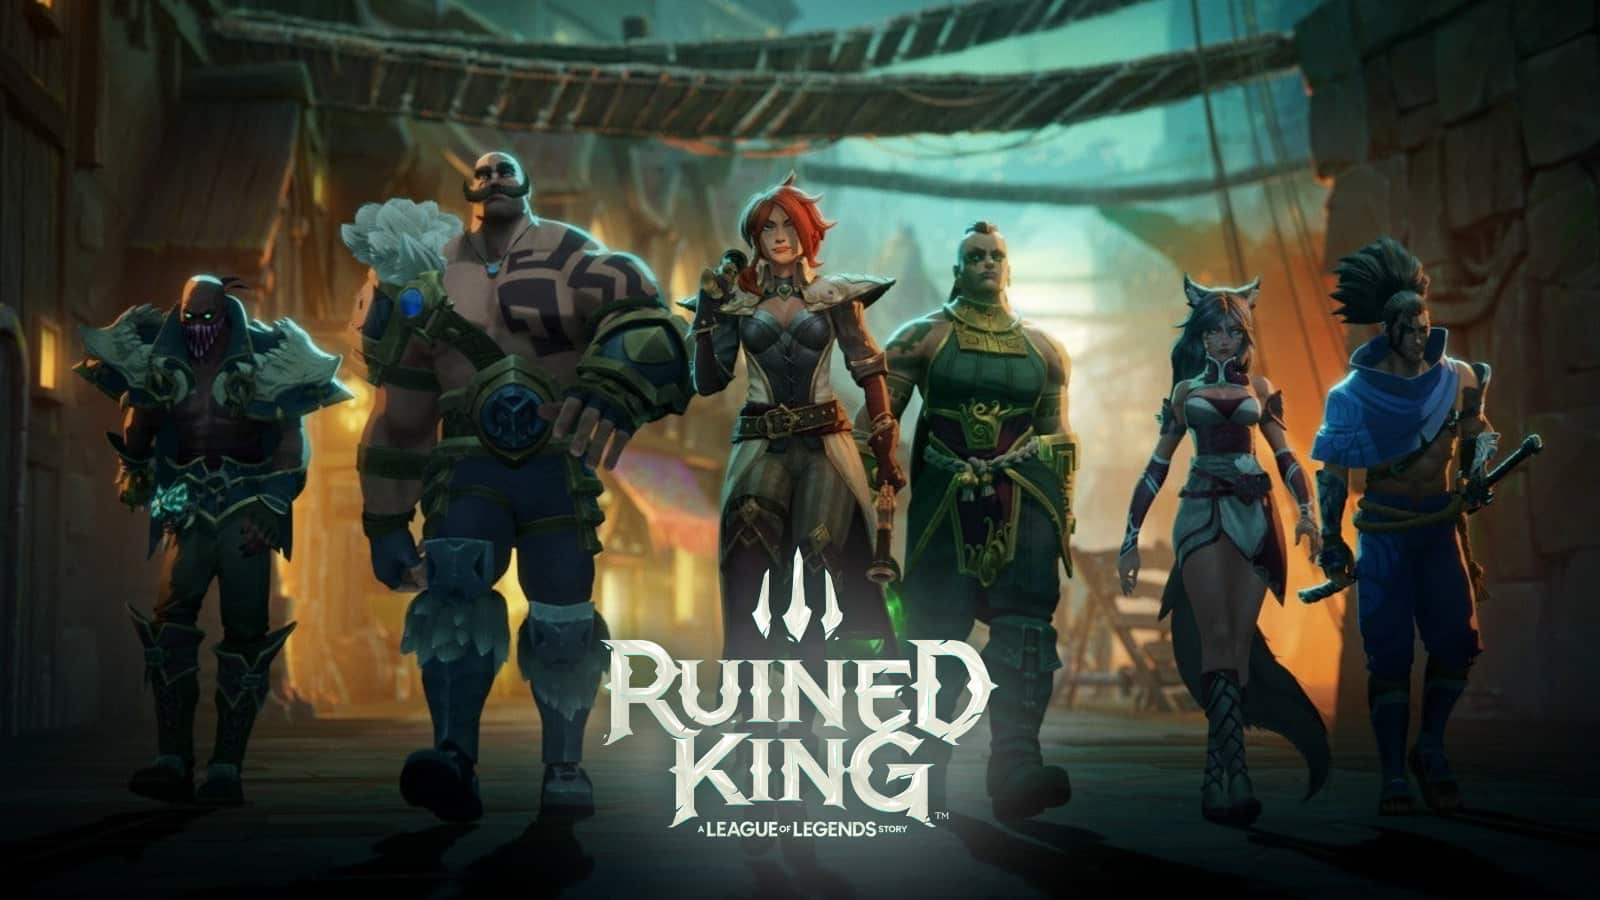 Viego the Ruined King Art - Ruined King: A League of Legends Story Art  Gallery